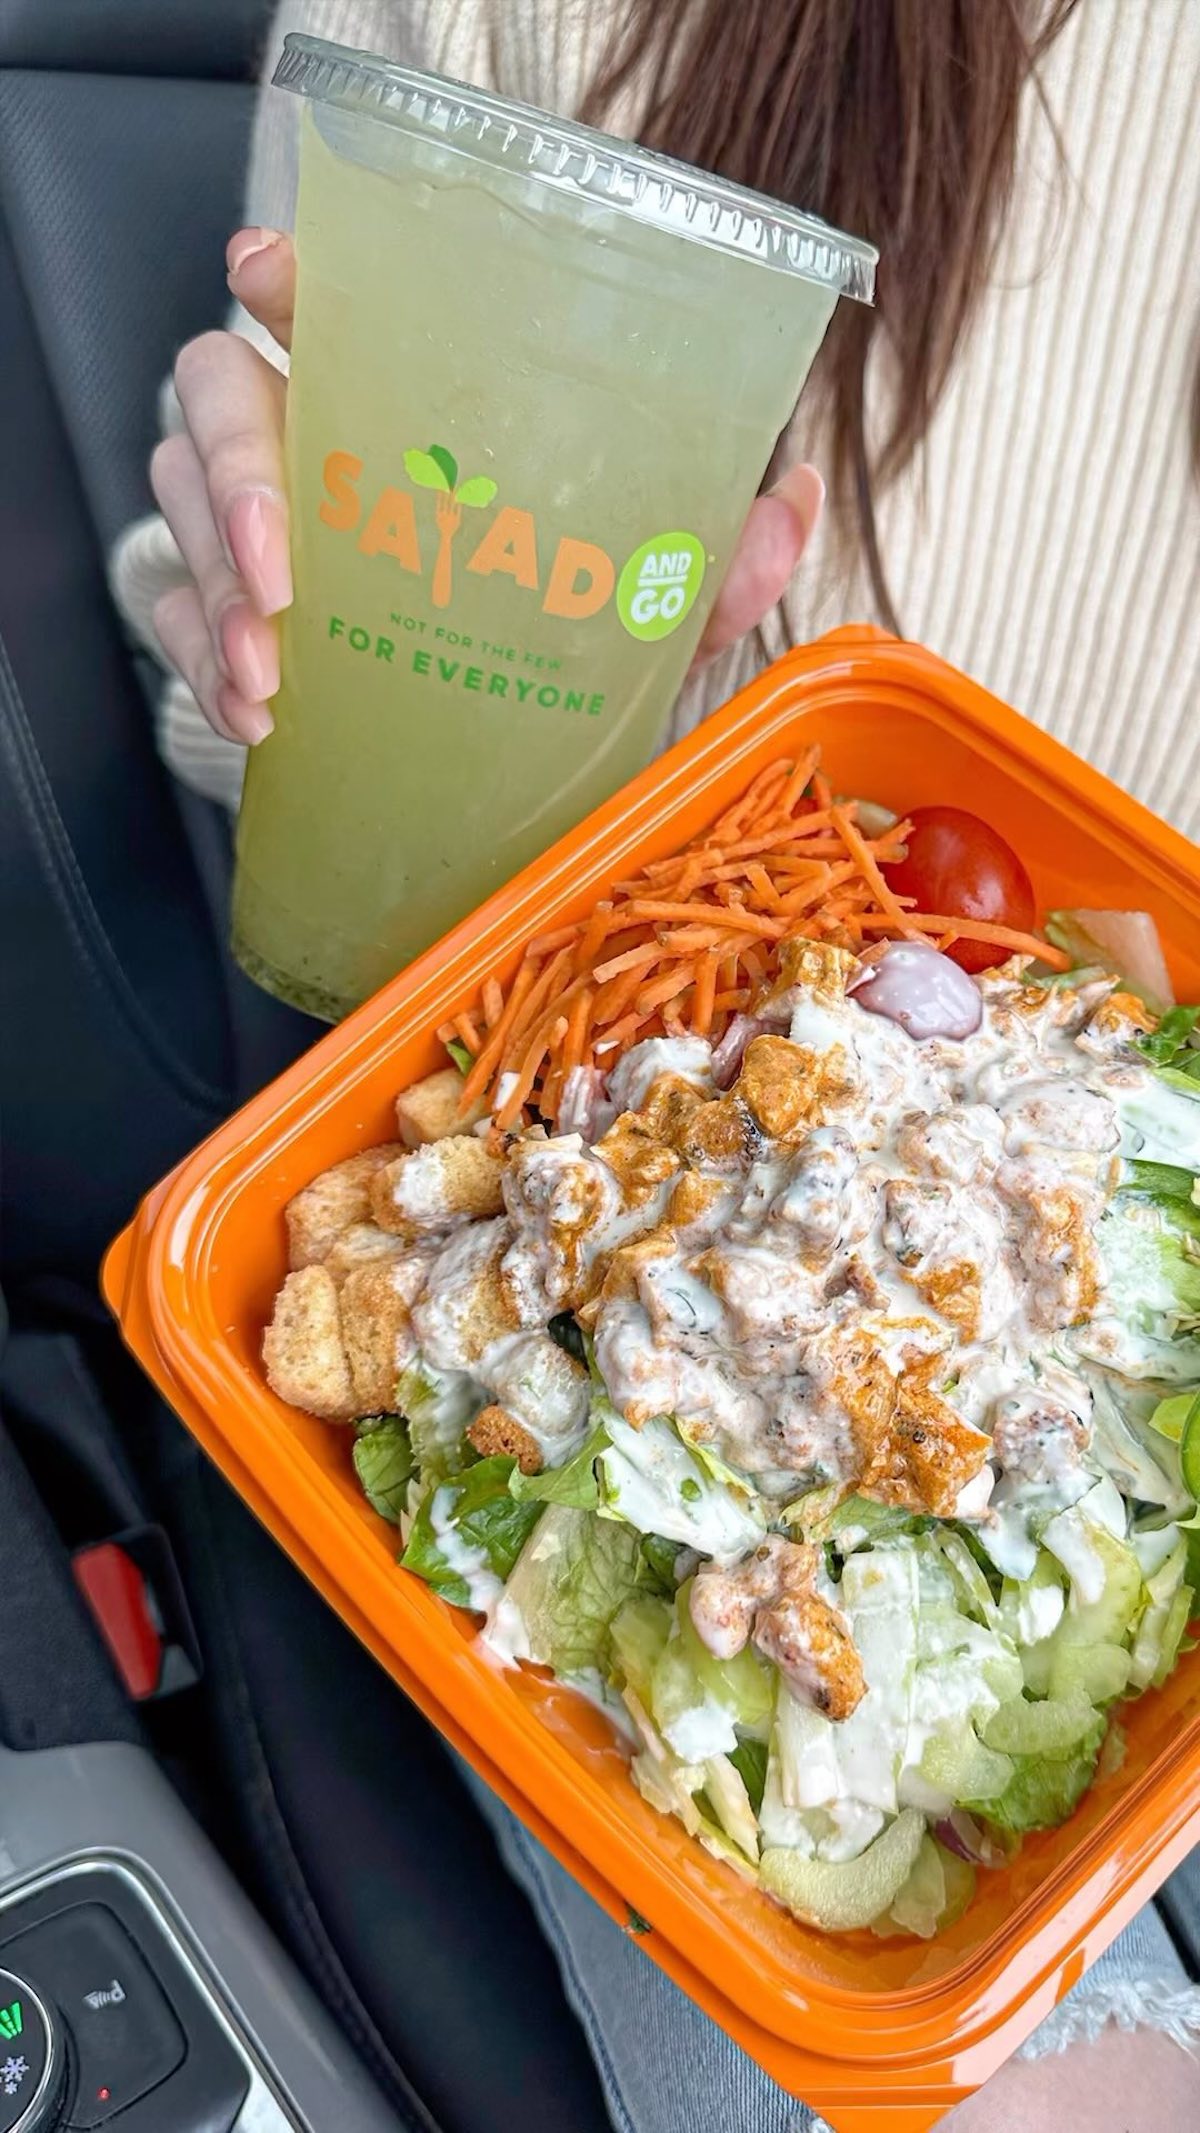 Salad And Go Is Set To Plant New Roots